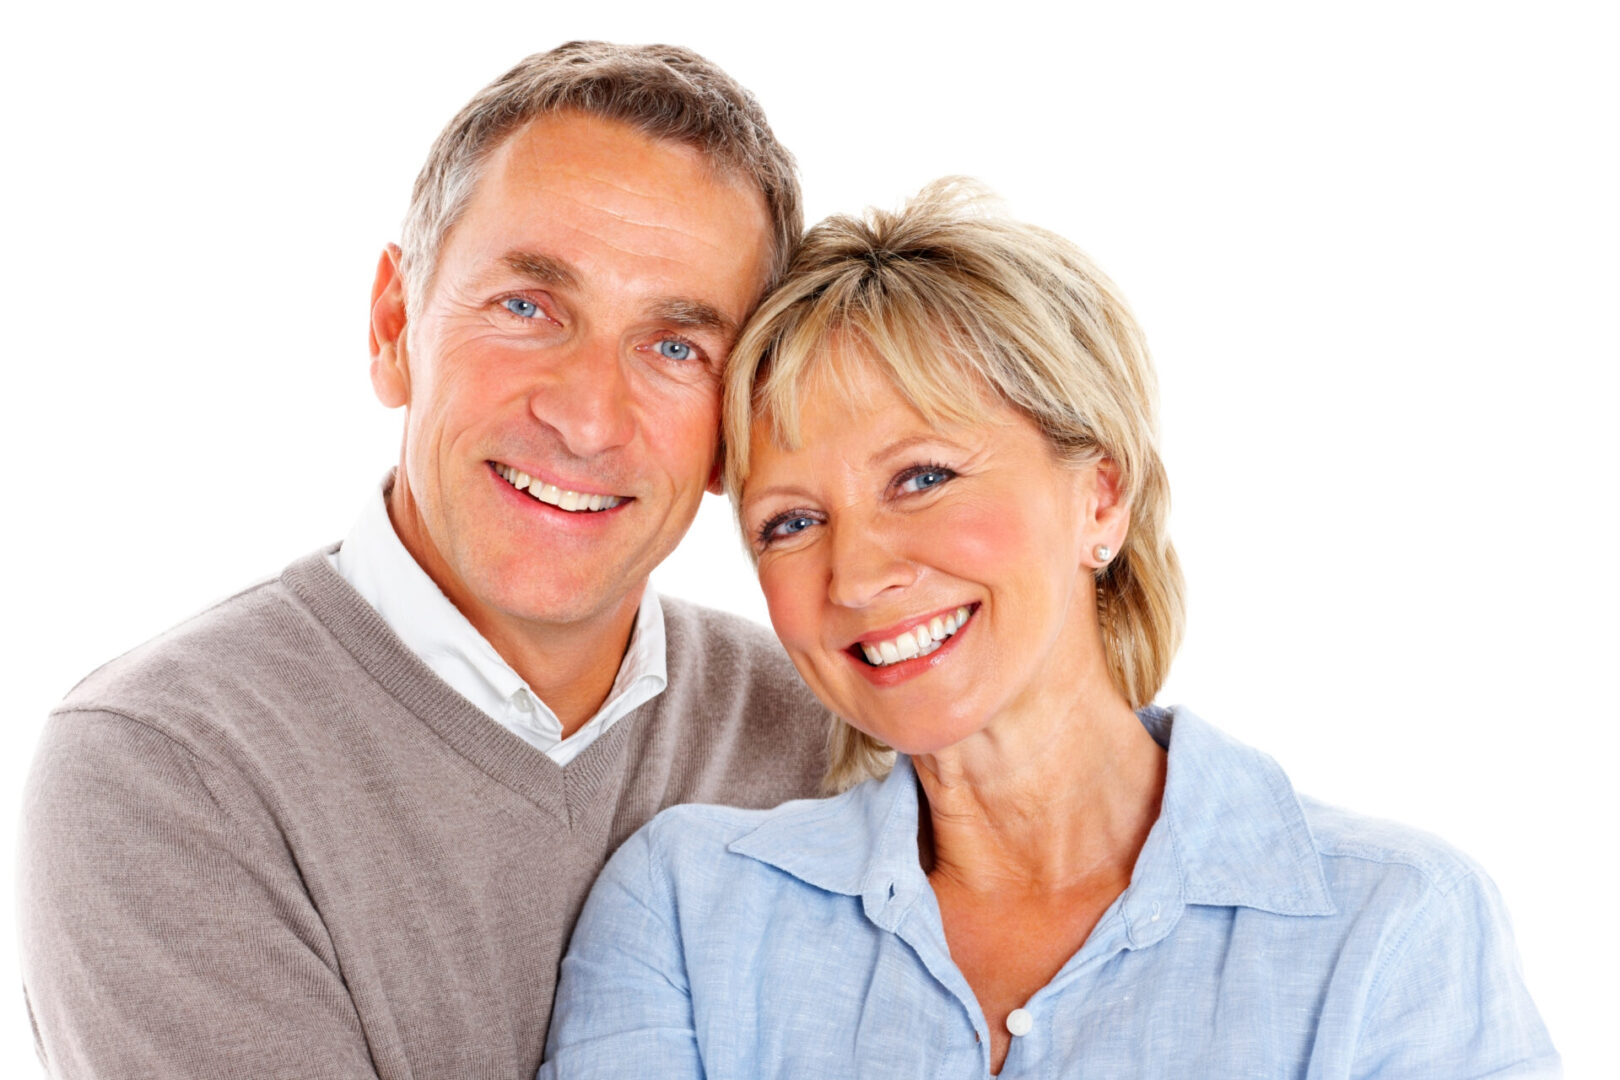 Portrait of loving mature couple smiling together against white background